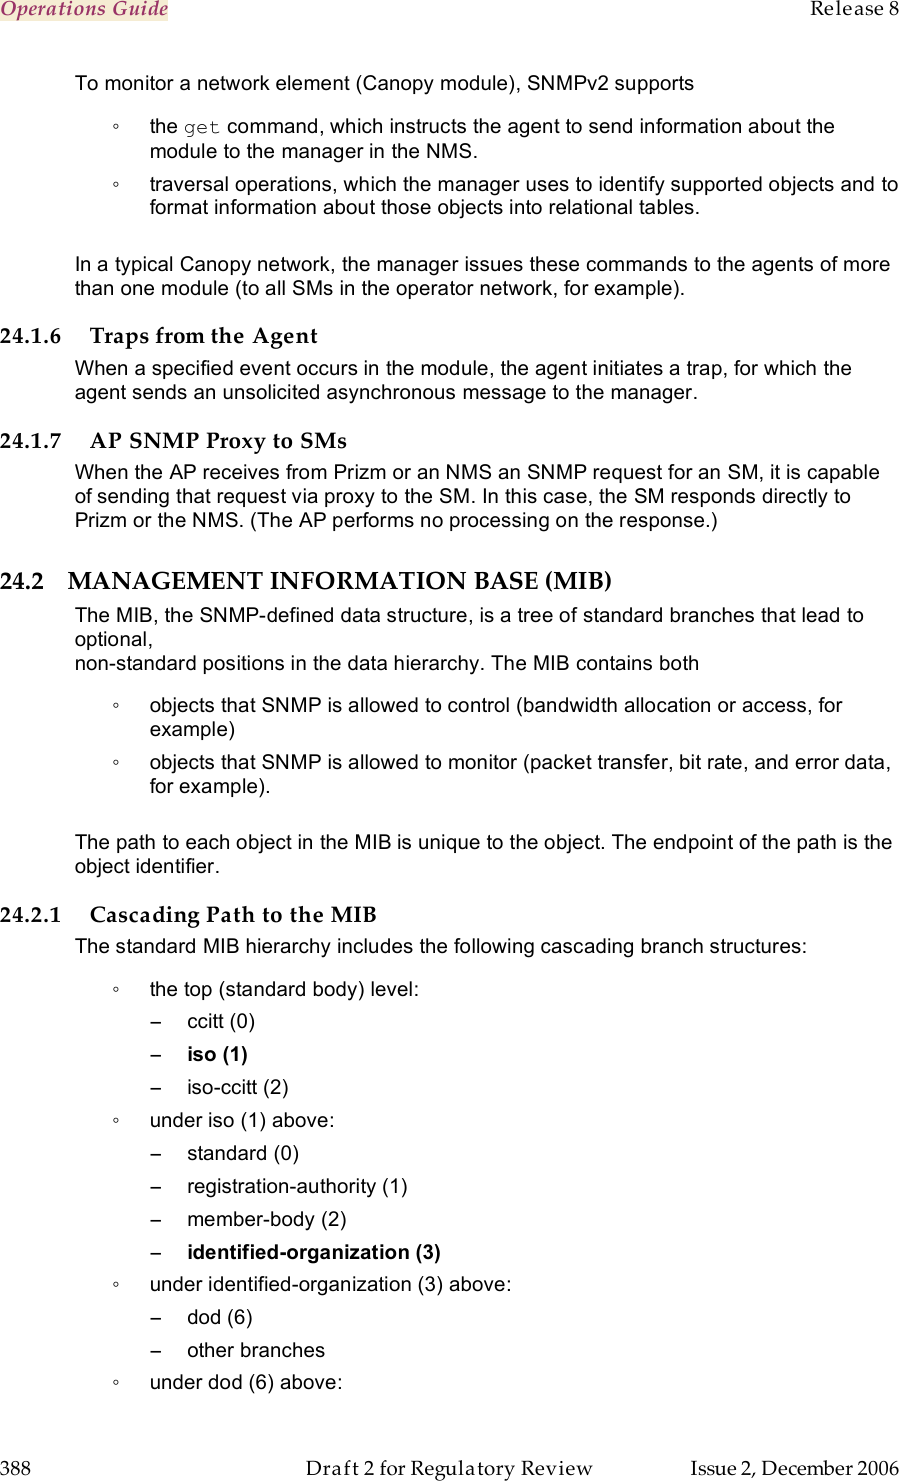 Operations Guide    Release 8   388  Draft 2 for Regulatory Review  Issue 2, December 2006 To monitor a network element (Canopy module), SNMPv2 supports  ◦  the get command, which instructs the agent to send information about the module to the manager in the NMS. ◦  traversal operations, which the manager uses to identify supported objects and to format information about those objects into relational tables.  In a typical Canopy network, the manager issues these commands to the agents of more than one module (to all SMs in the operator network, for example). 24.1.6 Traps from the Agent When a specified event occurs in the module, the agent initiates a trap, for which the agent sends an unsolicited asynchronous message to the manager. 24.1.7 AP SNMP Proxy to SMs When the AP receives from Prizm or an NMS an SNMP request for an SM, it is capable of sending that request via proxy to the SM. In this case, the SM responds directly to Prizm or the NMS. (The AP performs no processing on the response.) 24.2 MANAGEMENT INFORMATION BASE (MIB) The MIB, the SNMP-defined data structure, is a tree of standard branches that lead to optional,  non-standard positions in the data hierarchy. The MIB contains both  ◦  objects that SNMP is allowed to control (bandwidth allocation or access, for example)  ◦  objects that SNMP is allowed to monitor (packet transfer, bit rate, and error data, for example).   The path to each object in the MIB is unique to the object. The endpoint of the path is the object identifier. 24.2.1 Cascading Path to the MIB The standard MIB hierarchy includes the following cascading branch structures: ◦  the top (standard body) level: −  ccitt (0) − iso (1) −  iso-ccitt (2) ◦  under iso (1) above: −  standard (0) −  registration-authority (1) −  member-body (2) − identified-organization (3) ◦  under identified-organization (3) above: −  dod (6) −  other branches ◦  under dod (6) above: 